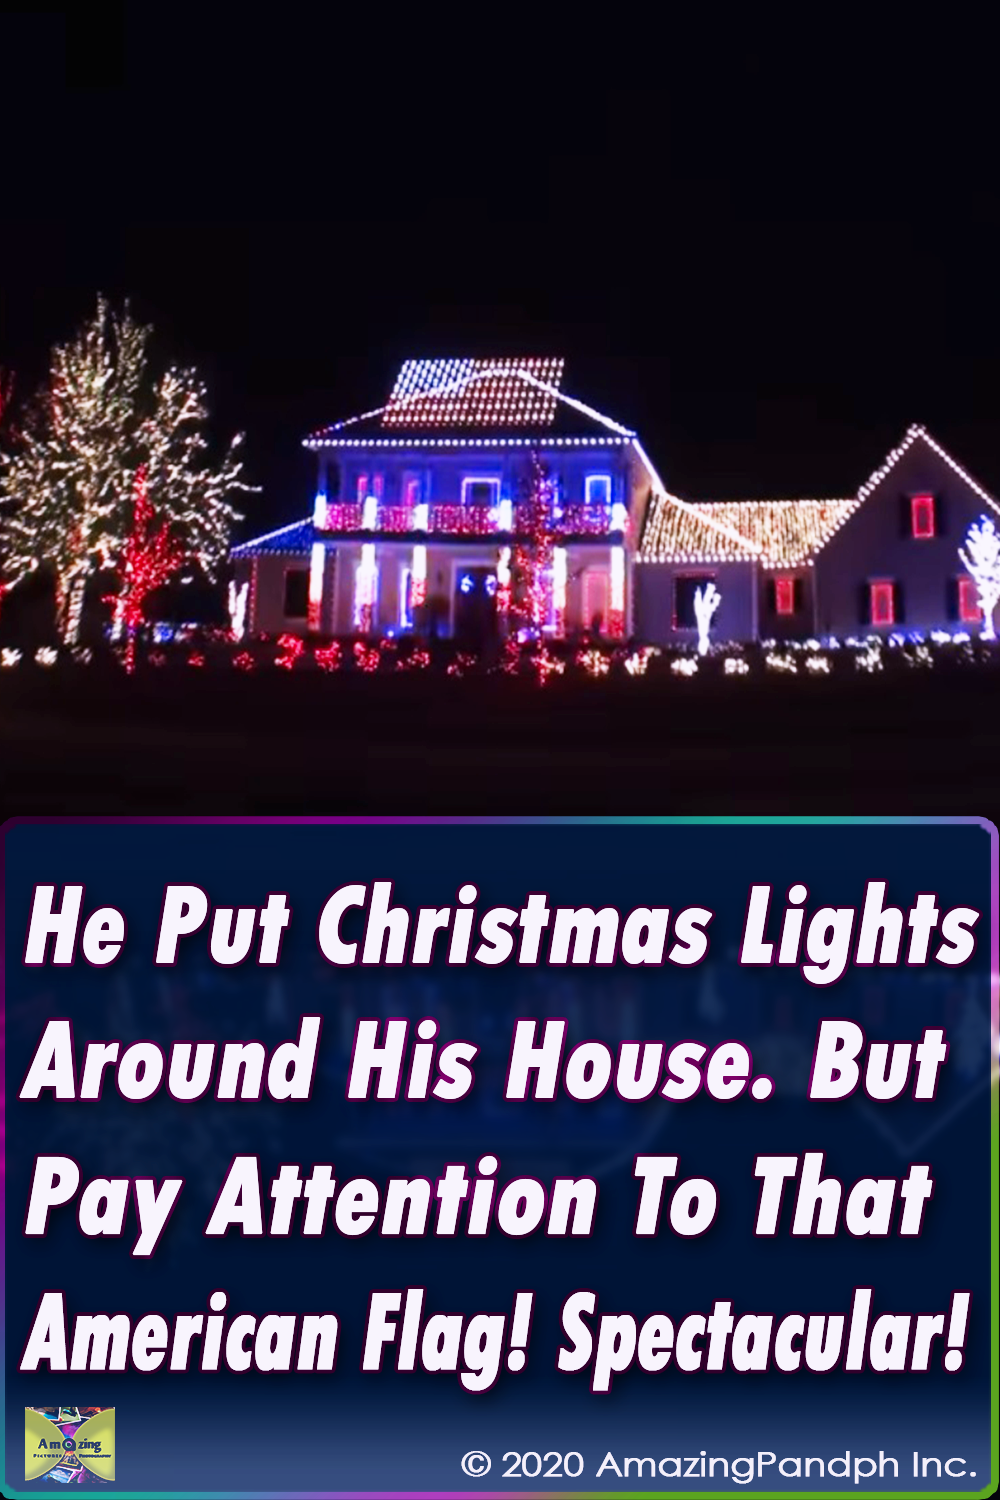 viral video,christmas,video,decoration,lights,christmas decoration,christmas light,houses in christmas,viral video,most viewed video,most shared,most watched video,best christmas video,beautiful colors,video full of colors